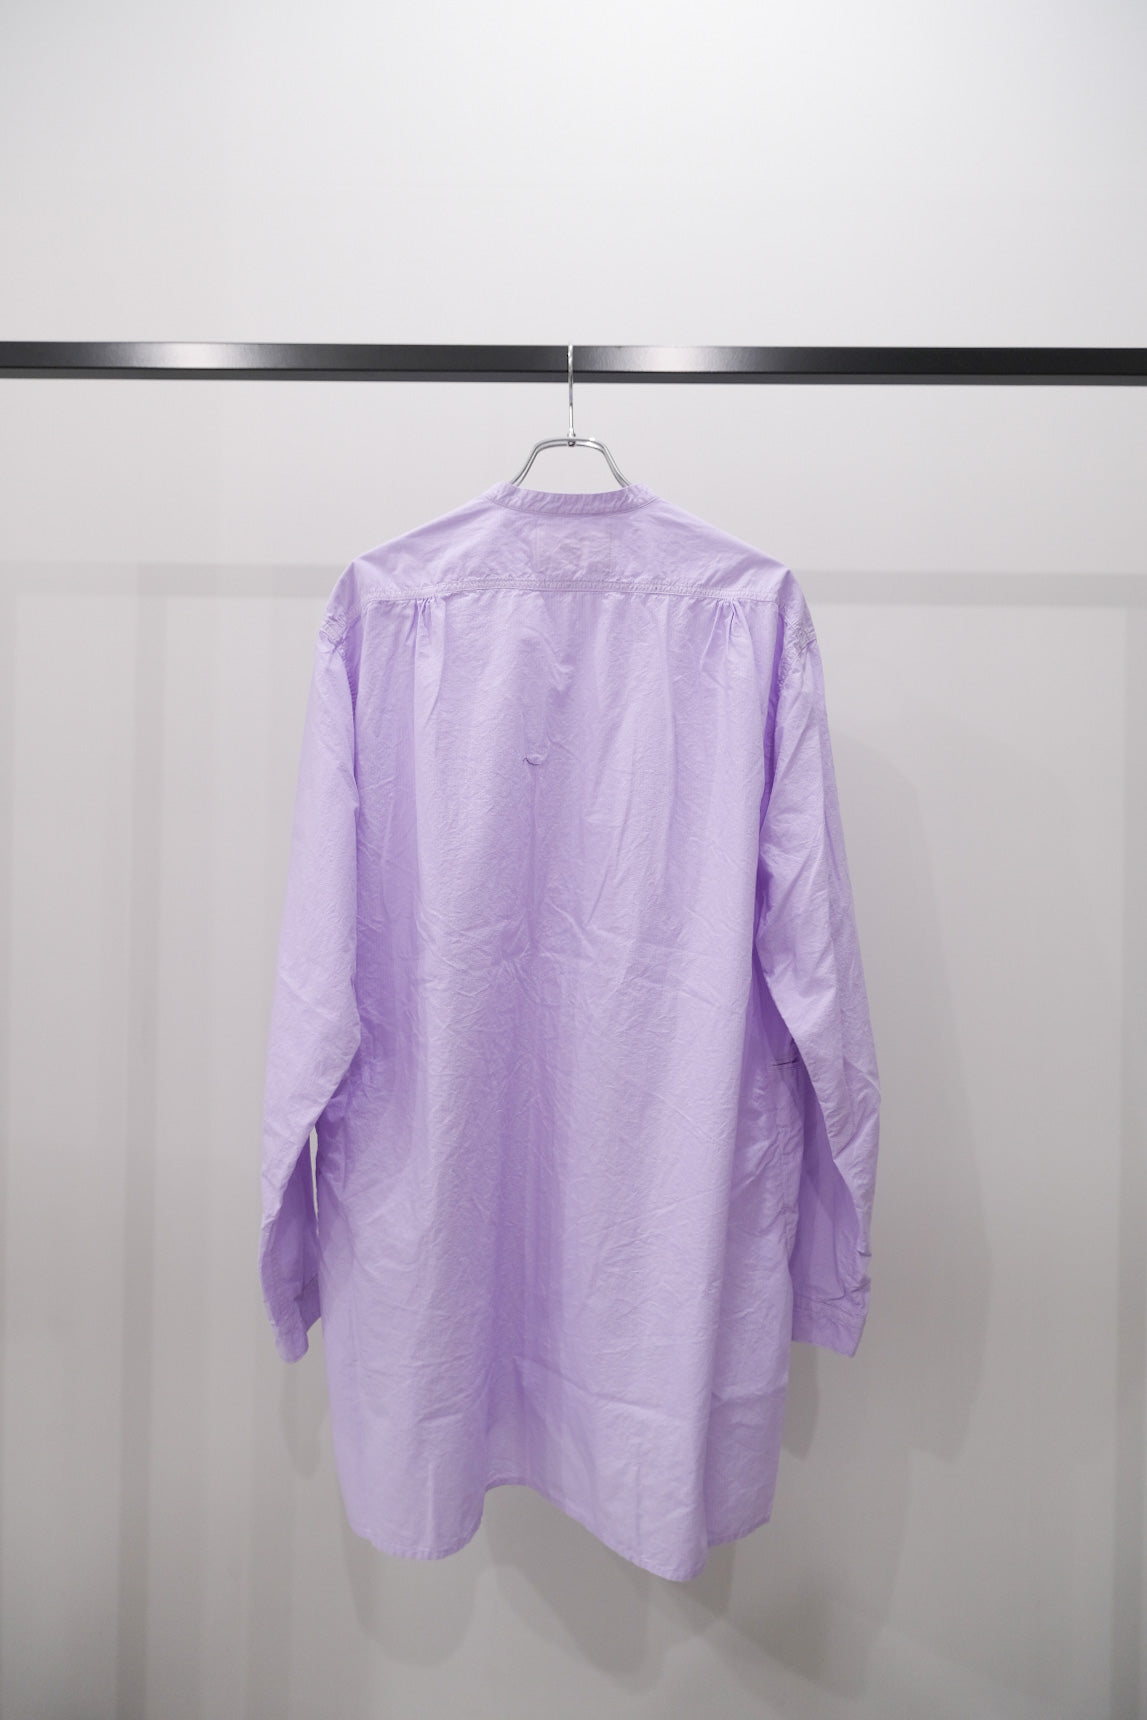 【30% off】SLEEPING SHIRT COLLECTION 03